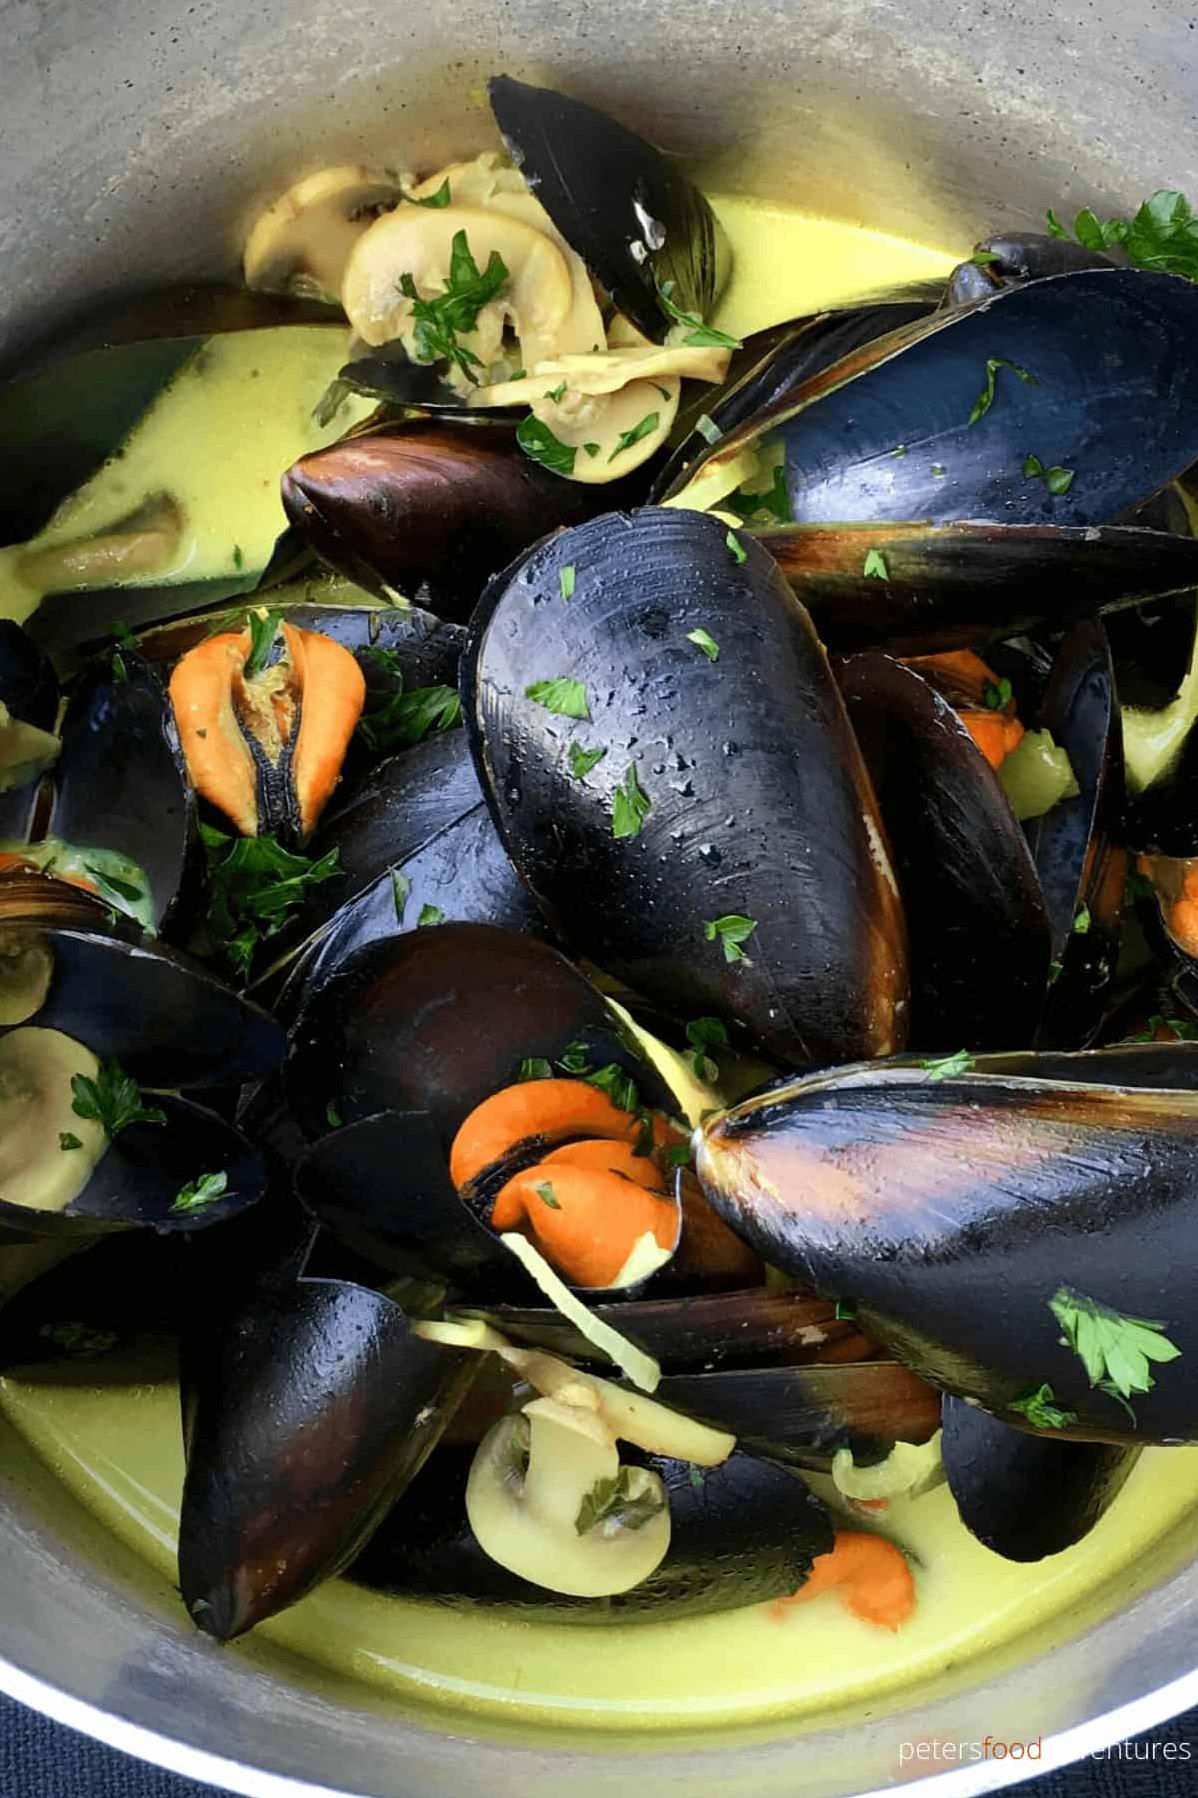  The tangy, buttery taste of the white wine sauce perfectly complements the briny flavor of the fresh mussels.